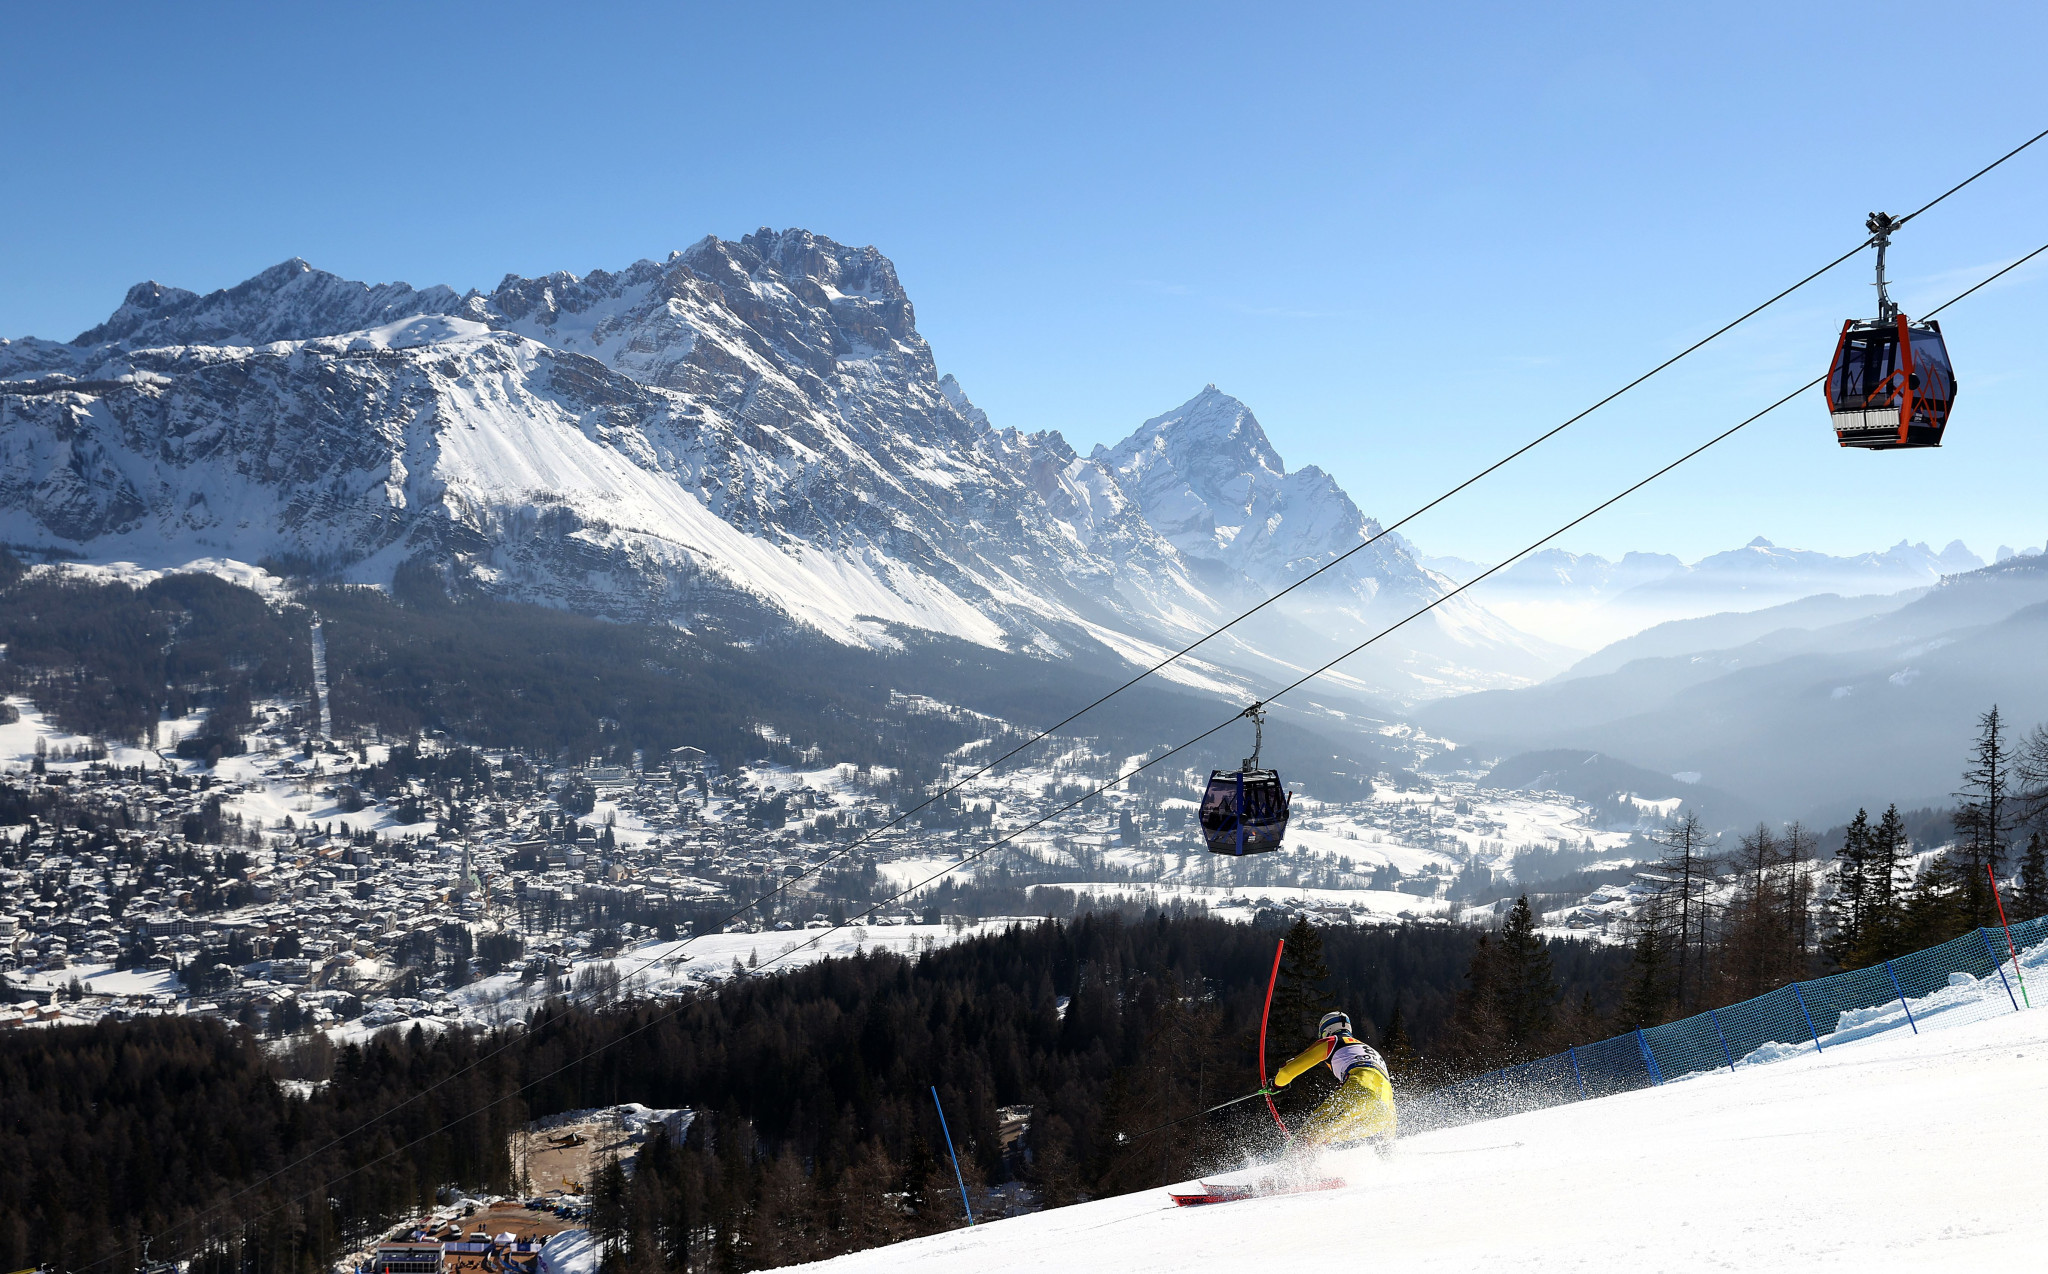 Alpine skiing, bobsleigh, skeleton, luge, curling and biathlon will take place in the Cortina d'Ampezzo cluster at the 2026 Winter Olympics ©Getty Images